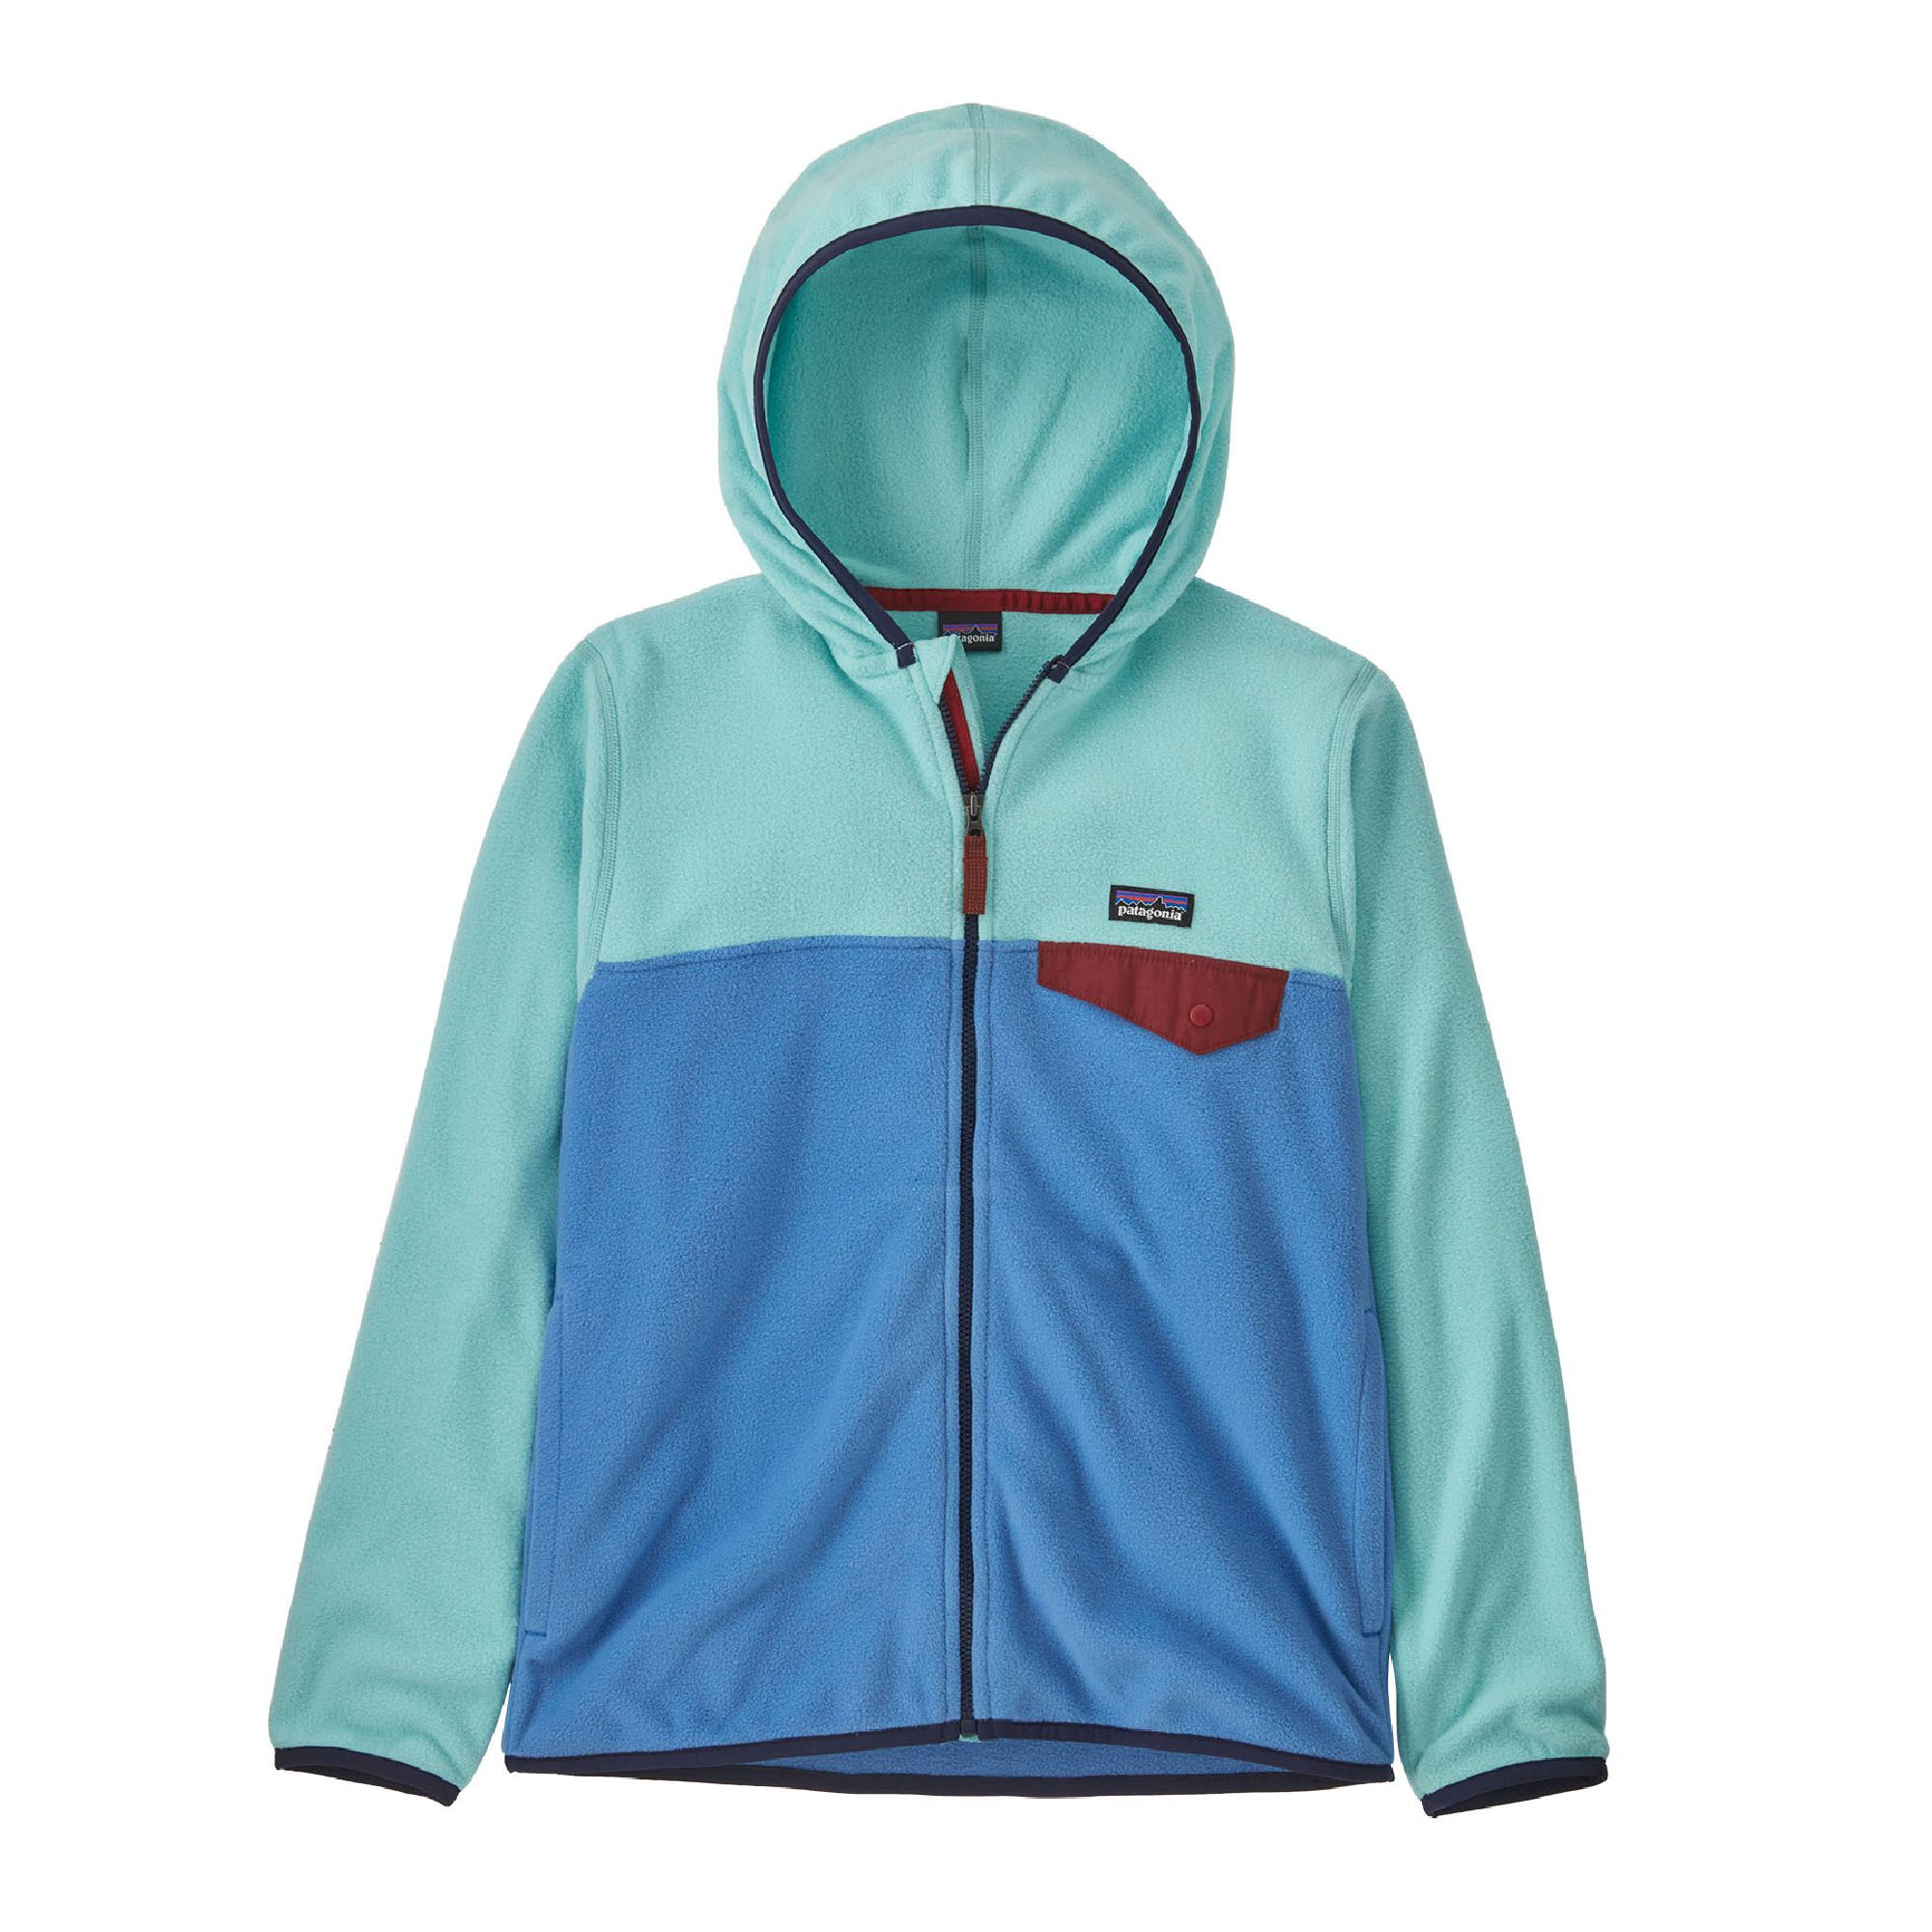 Patagonia - Micro D Snap-T Jacket - Giacca in pile - Bambinis'